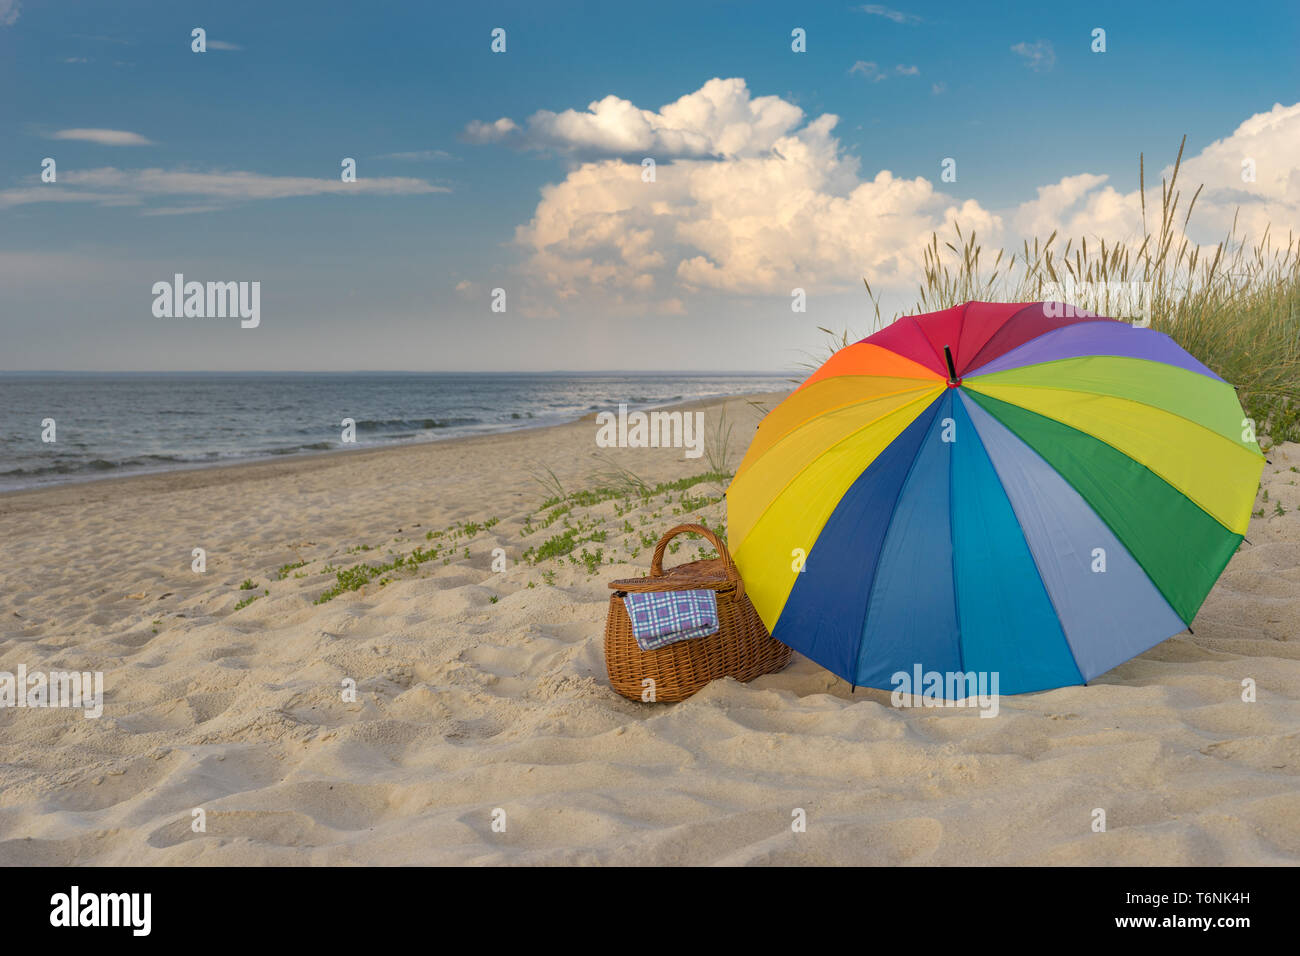 Multicolored umbrella and picnic basket against scenic beach and clouds, weekend break concept Stock Photo